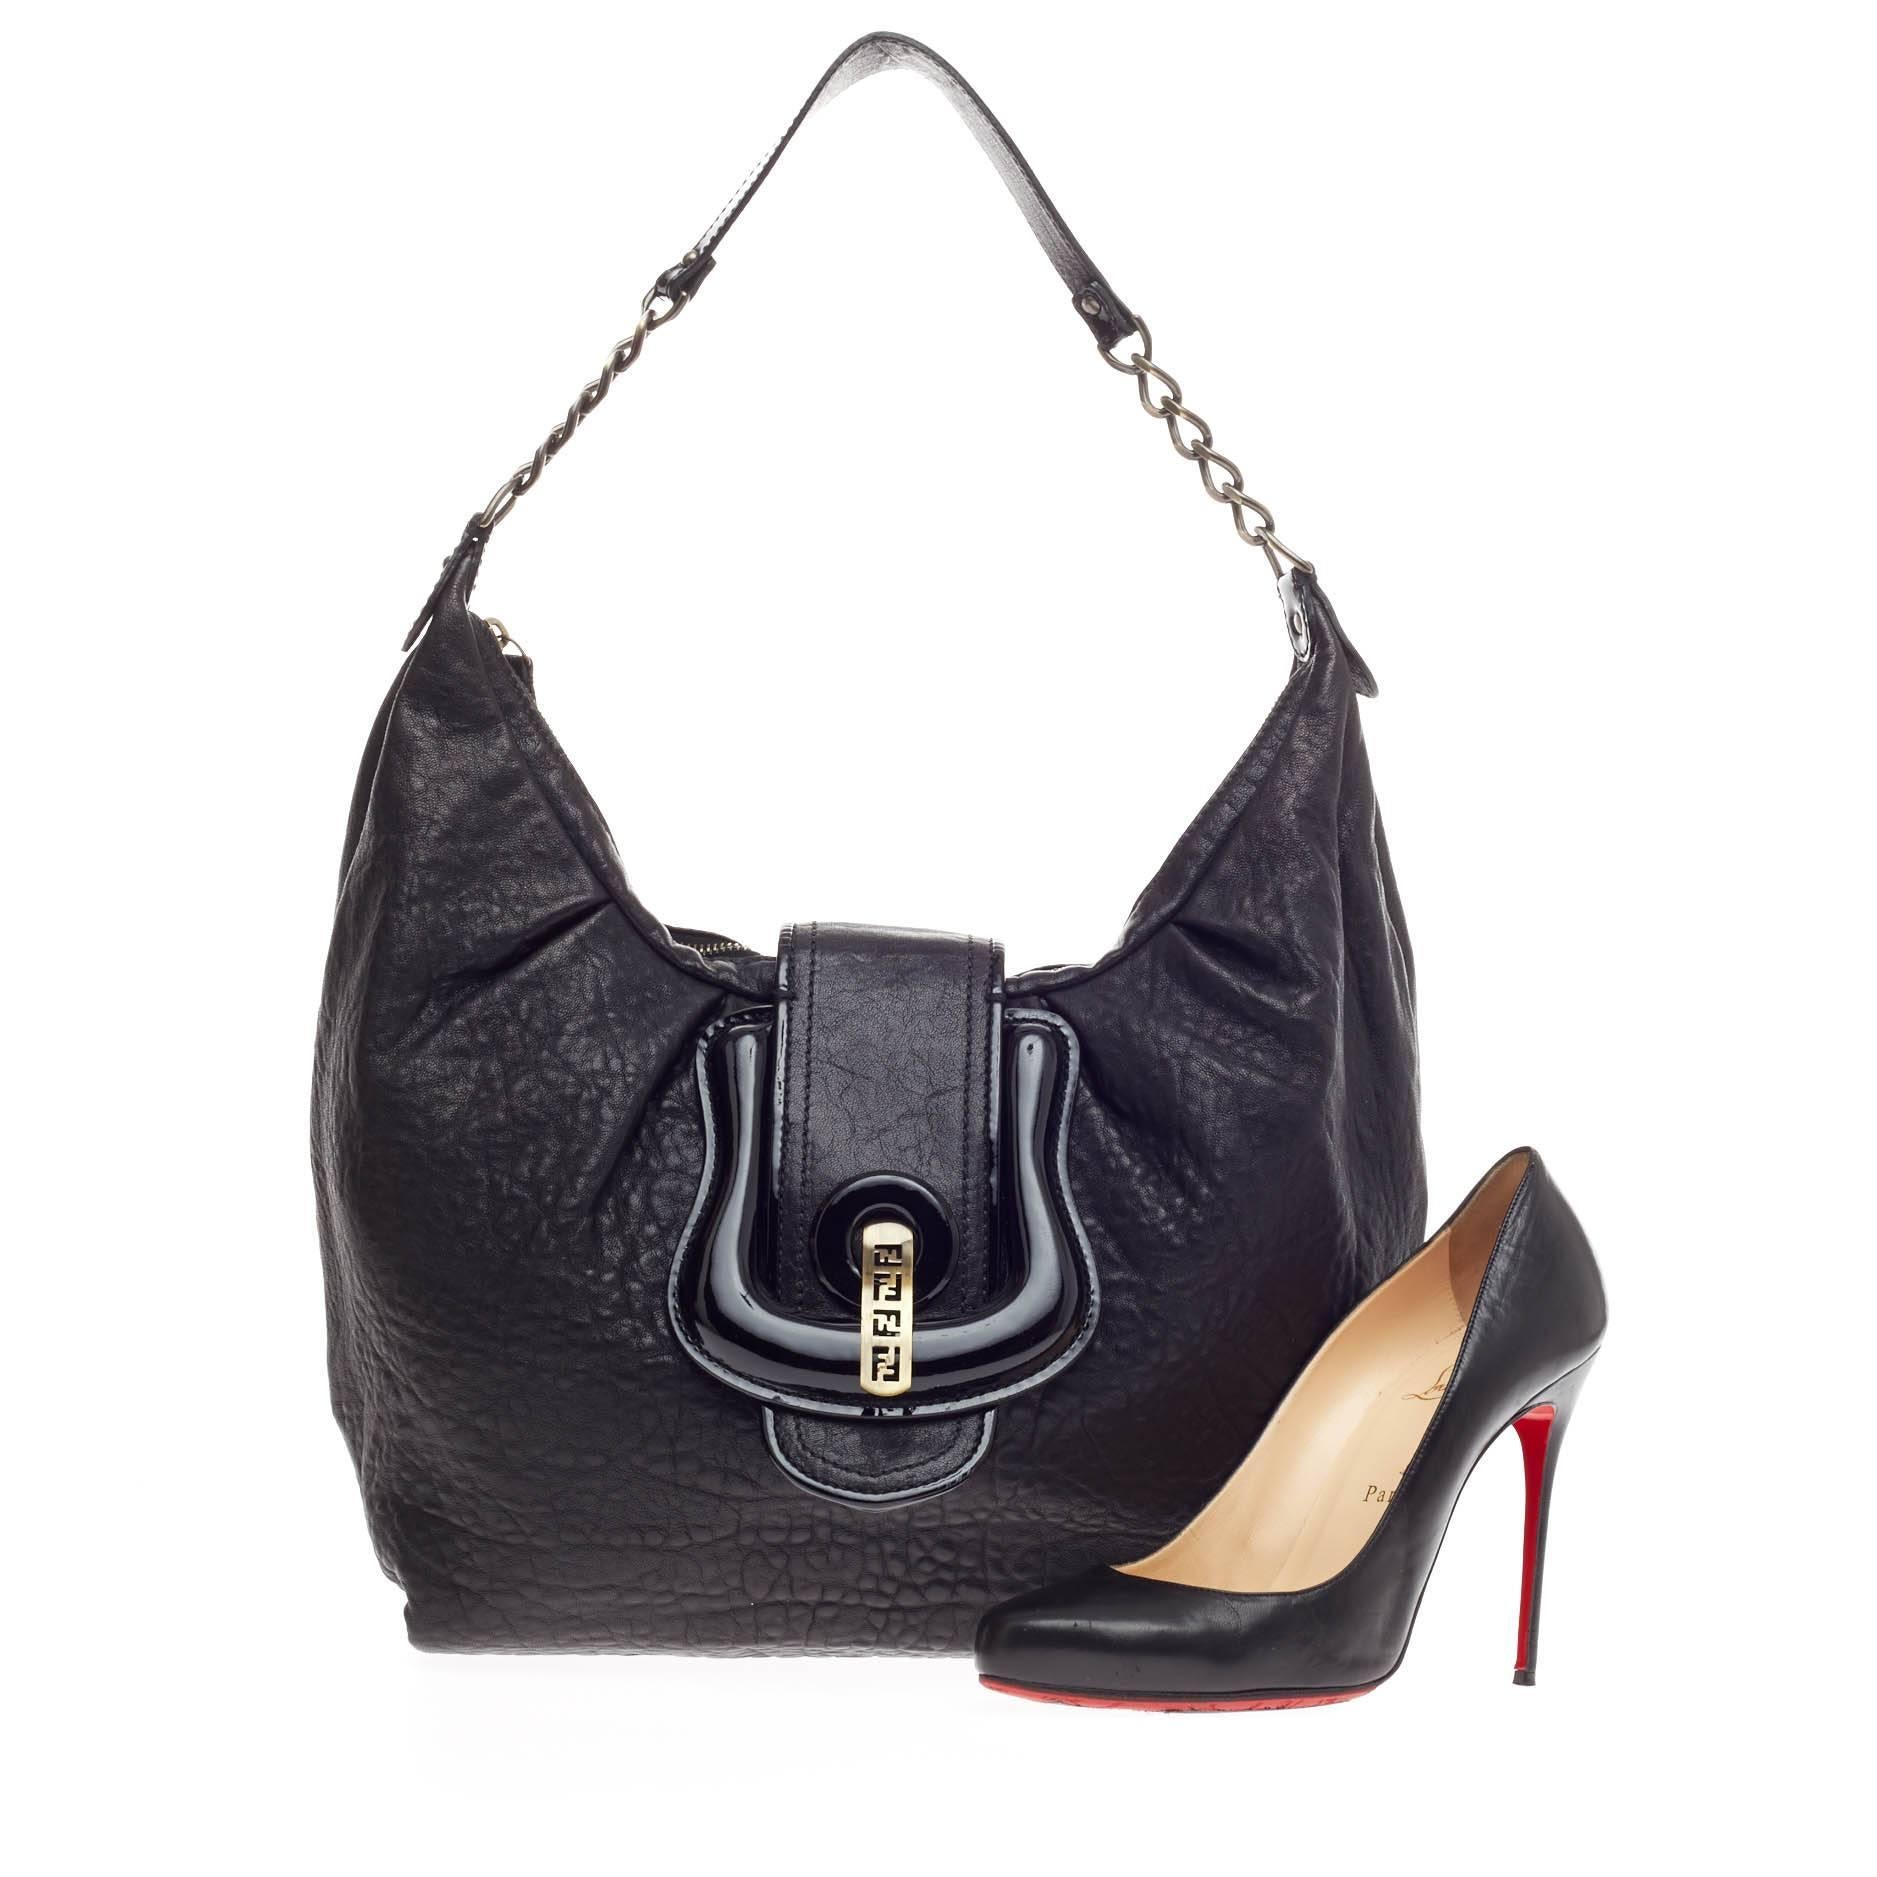 This authentic Fendi B. Hobo Leather is ideal for everyday use. Crafted in black textured pebbled leather and patent detailing, this hobo features chain straps with leather pads, giant flap belt and buckle details, and gold-tone hardware accents.